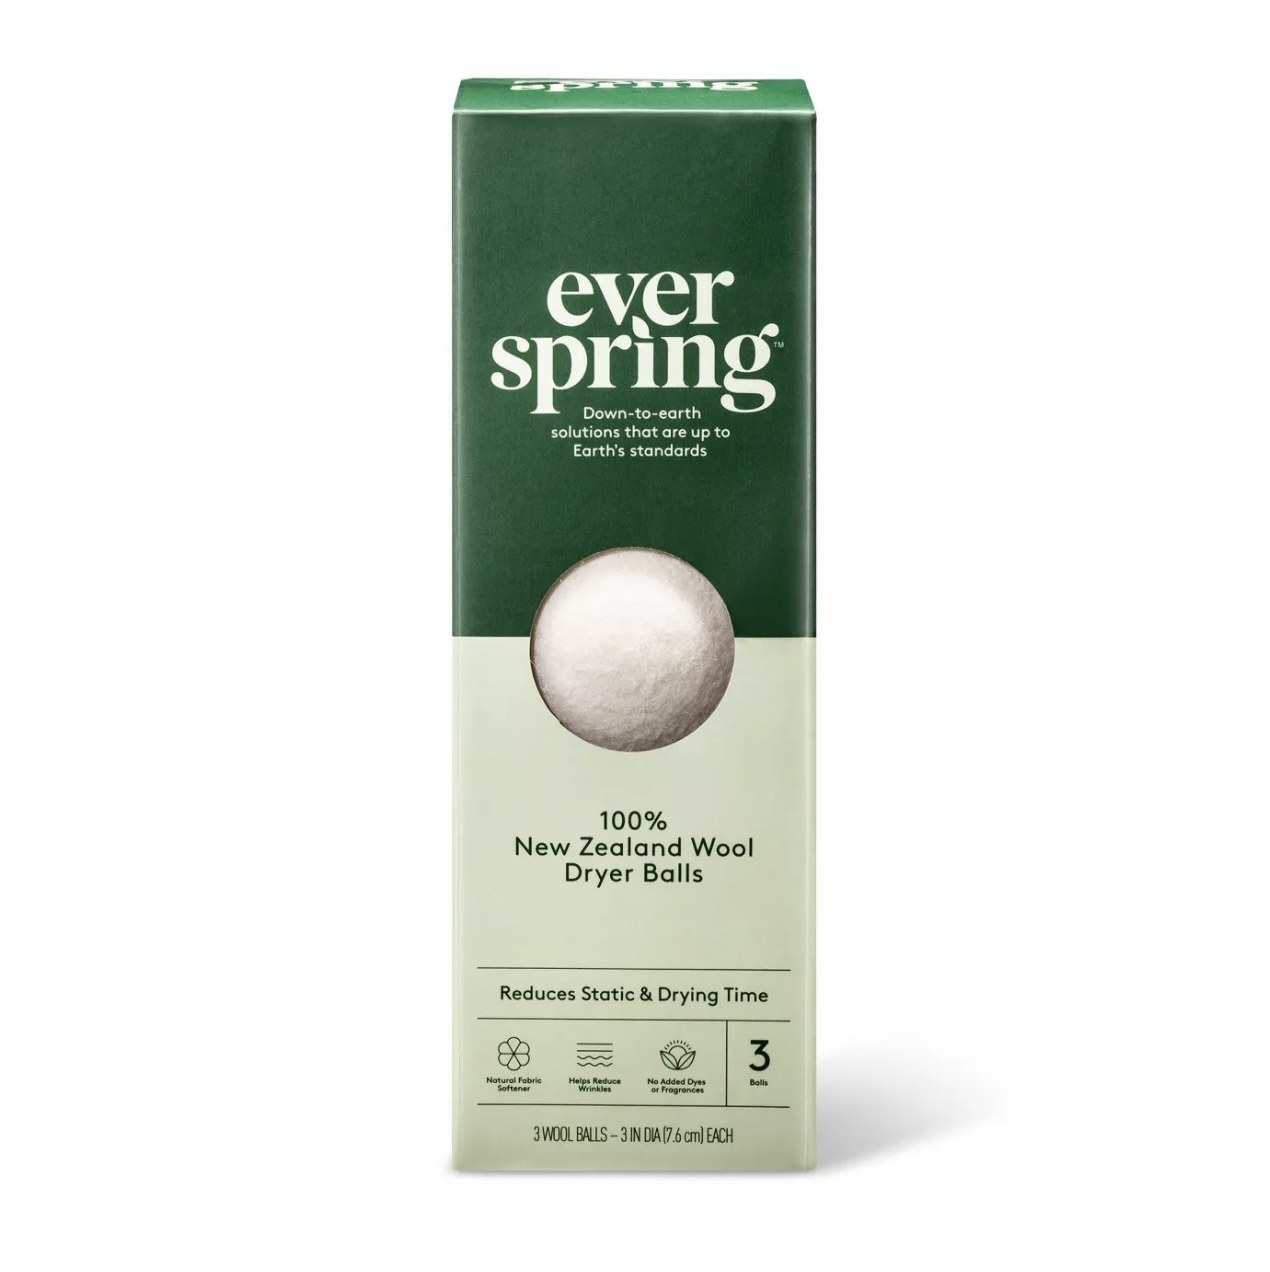 A box that says &quot;ever spring&quot; and is split into dark green and light green with a white wool dryer ball showing